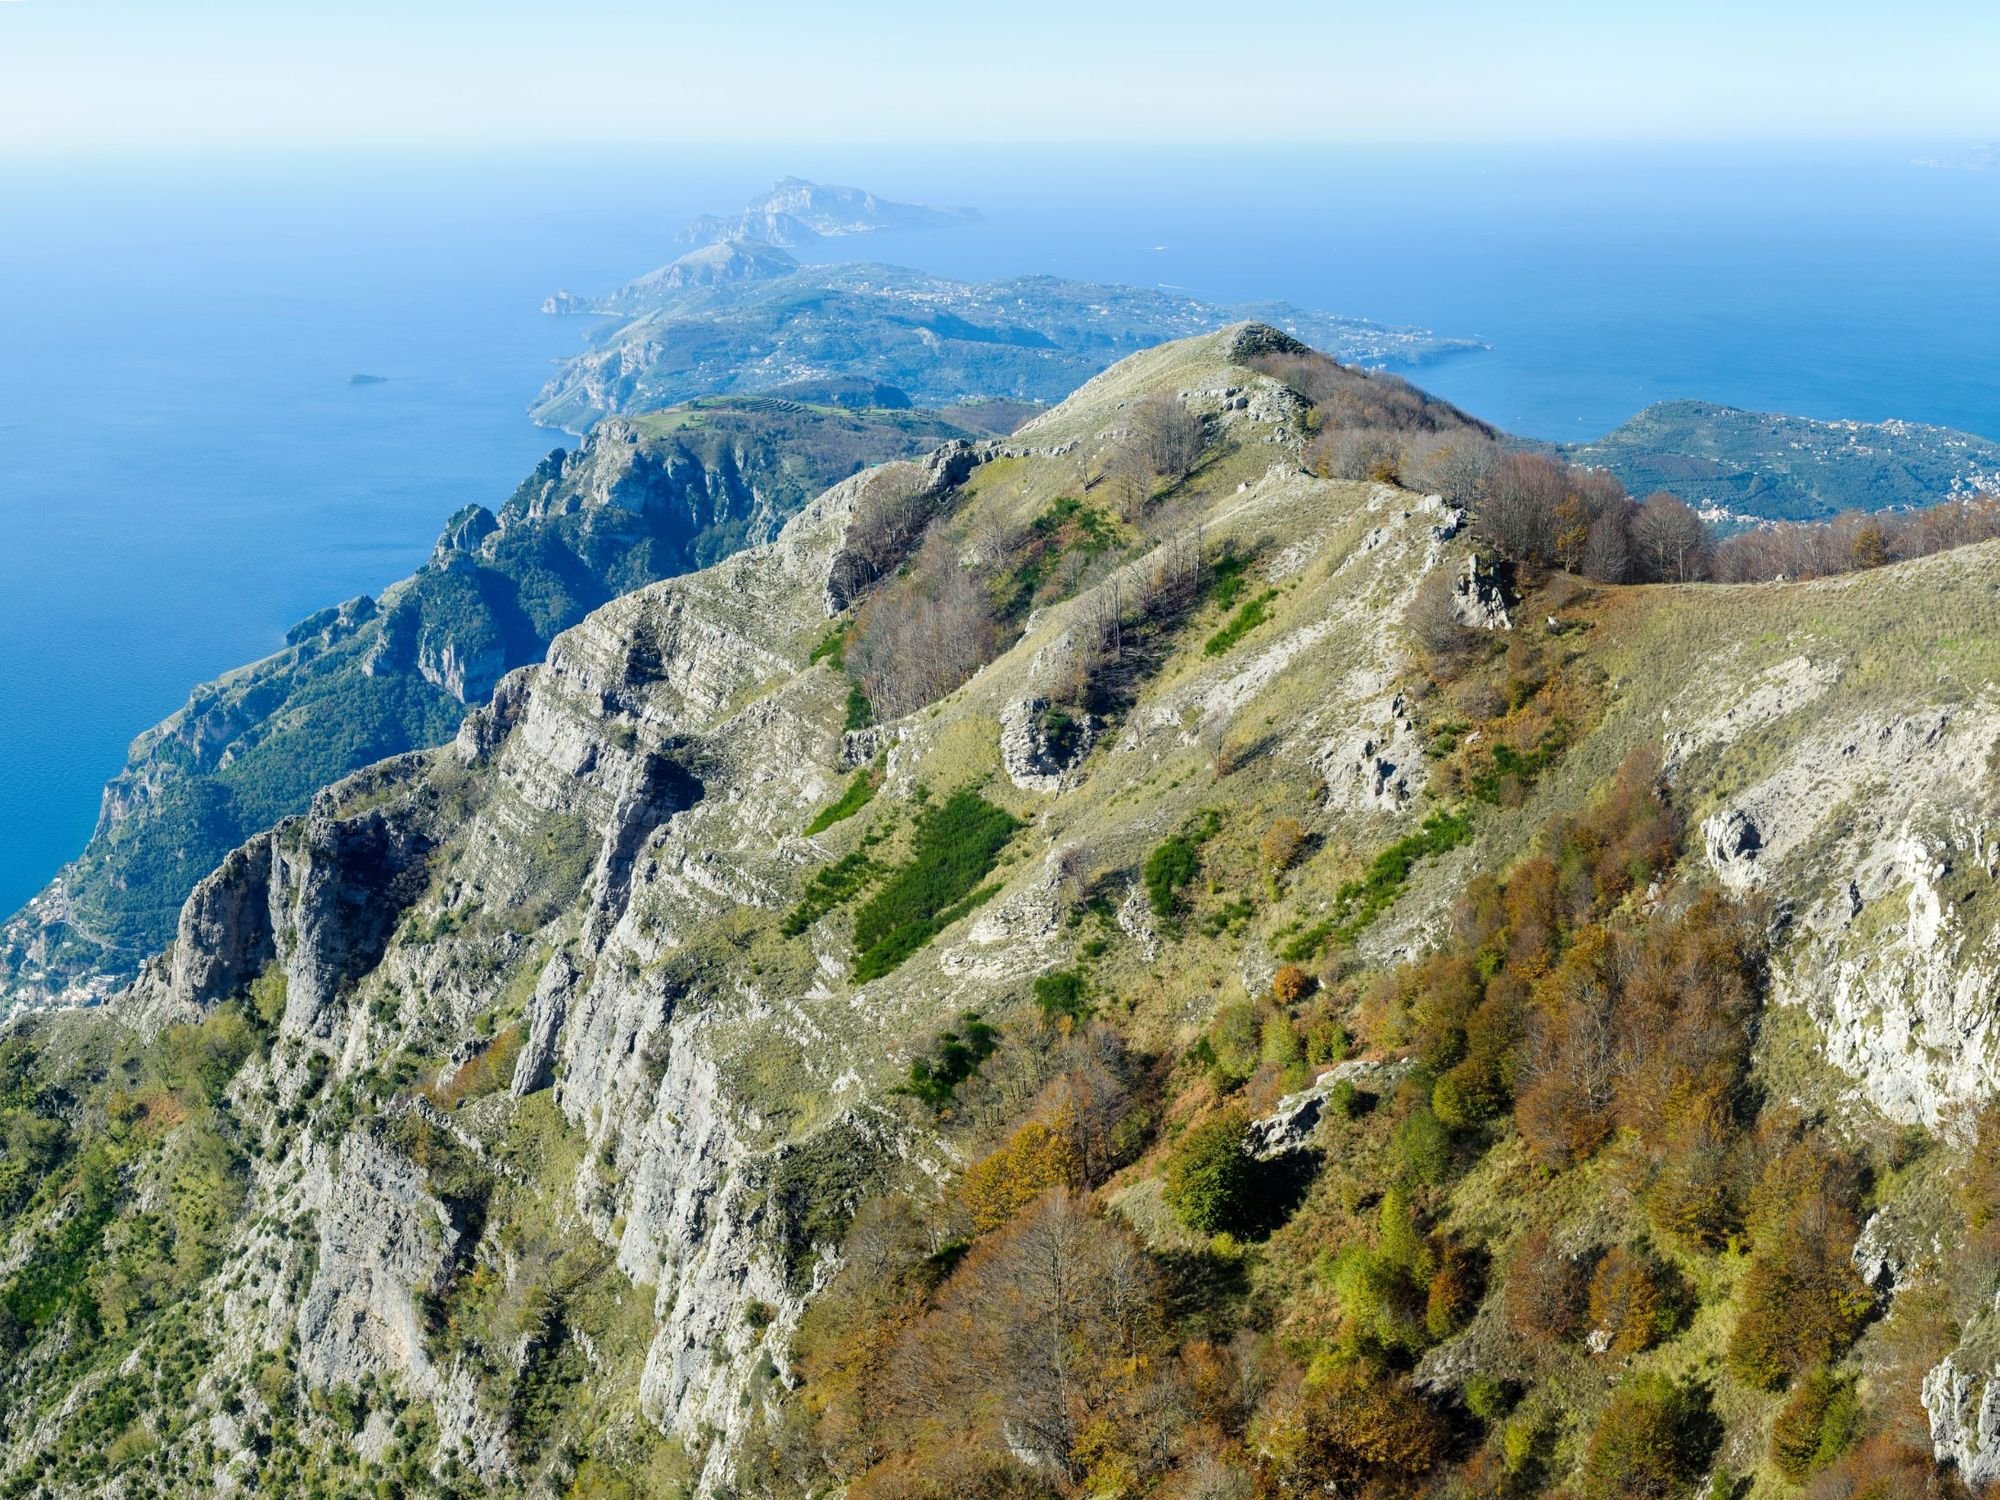 The views of the Amalfi Coast, away from the crowds and up in the mountains behind. Photo: Genius Loci